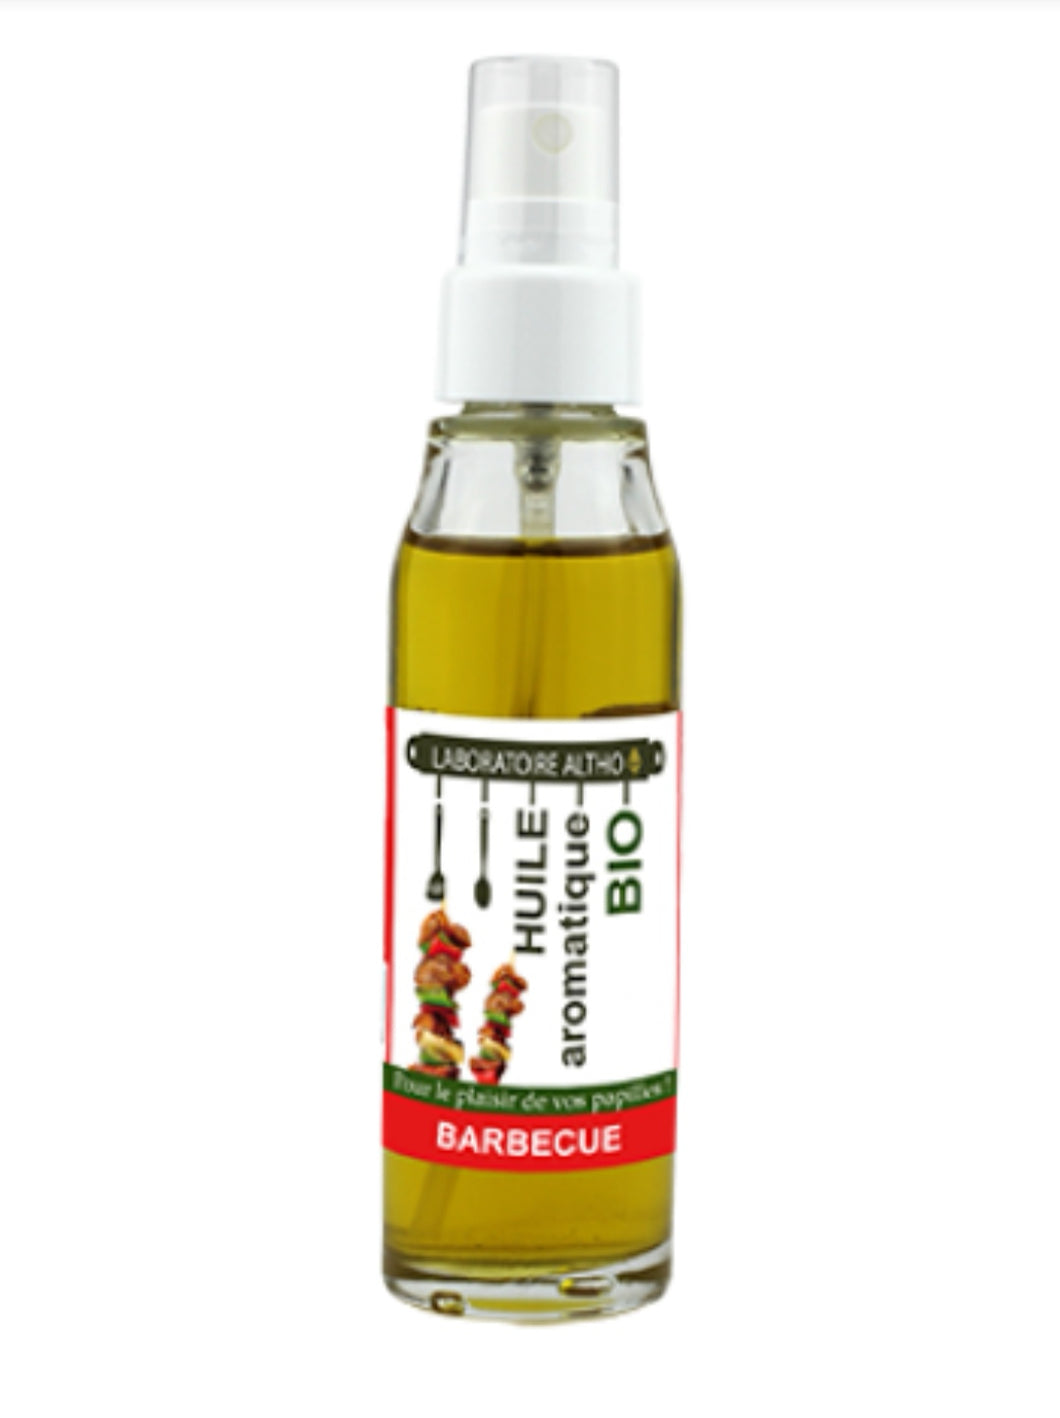 Barbecue - Organic Cooking Oil 50ml Buy in Ireland Health and wellness store online